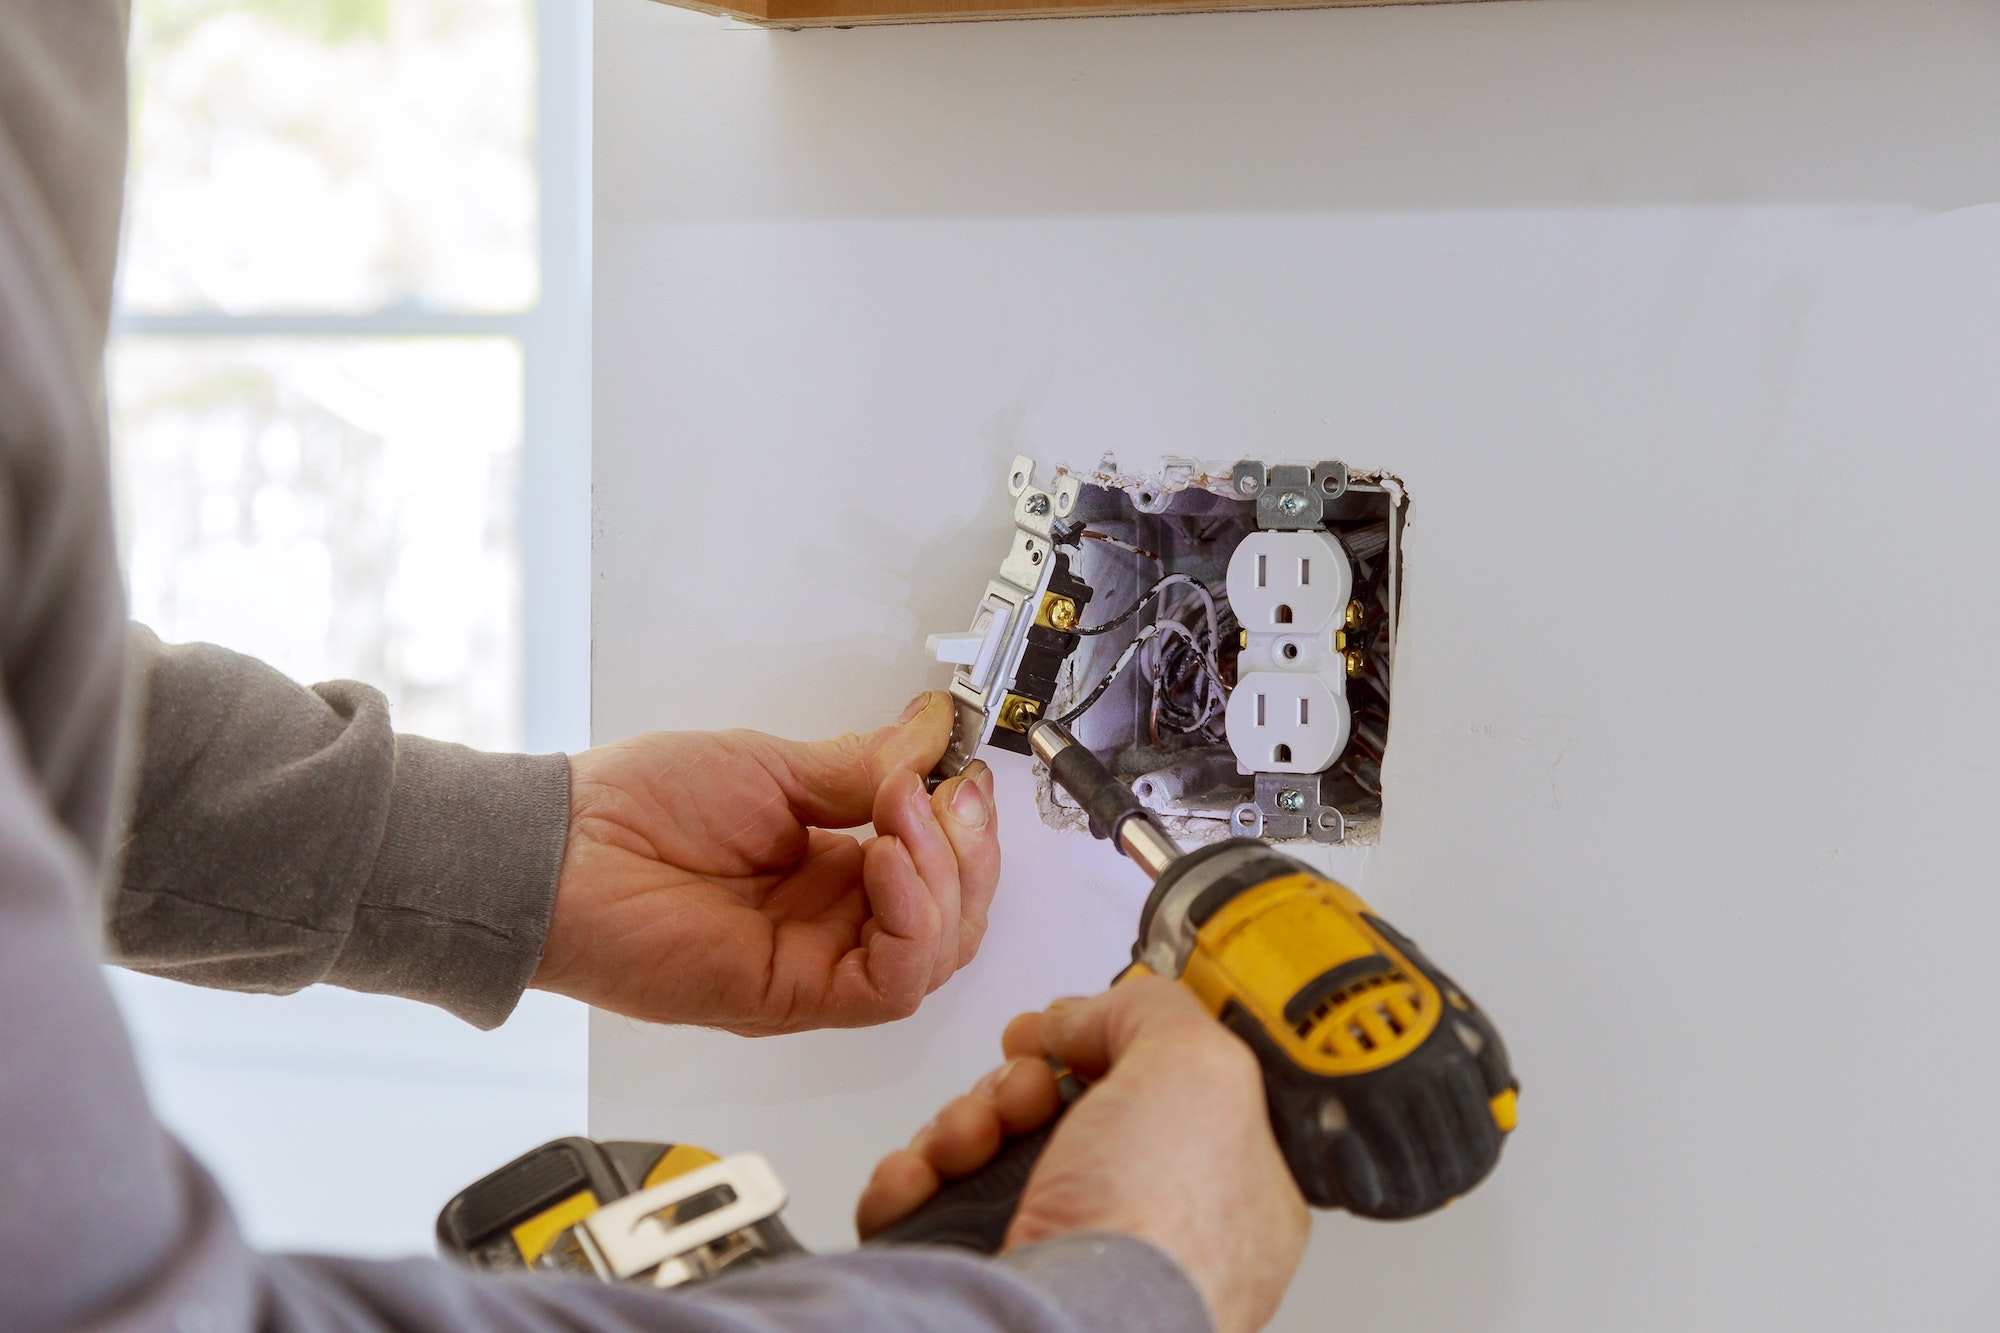 Work on installing electrical outlets with electrical wires and connector installed in plasterboard